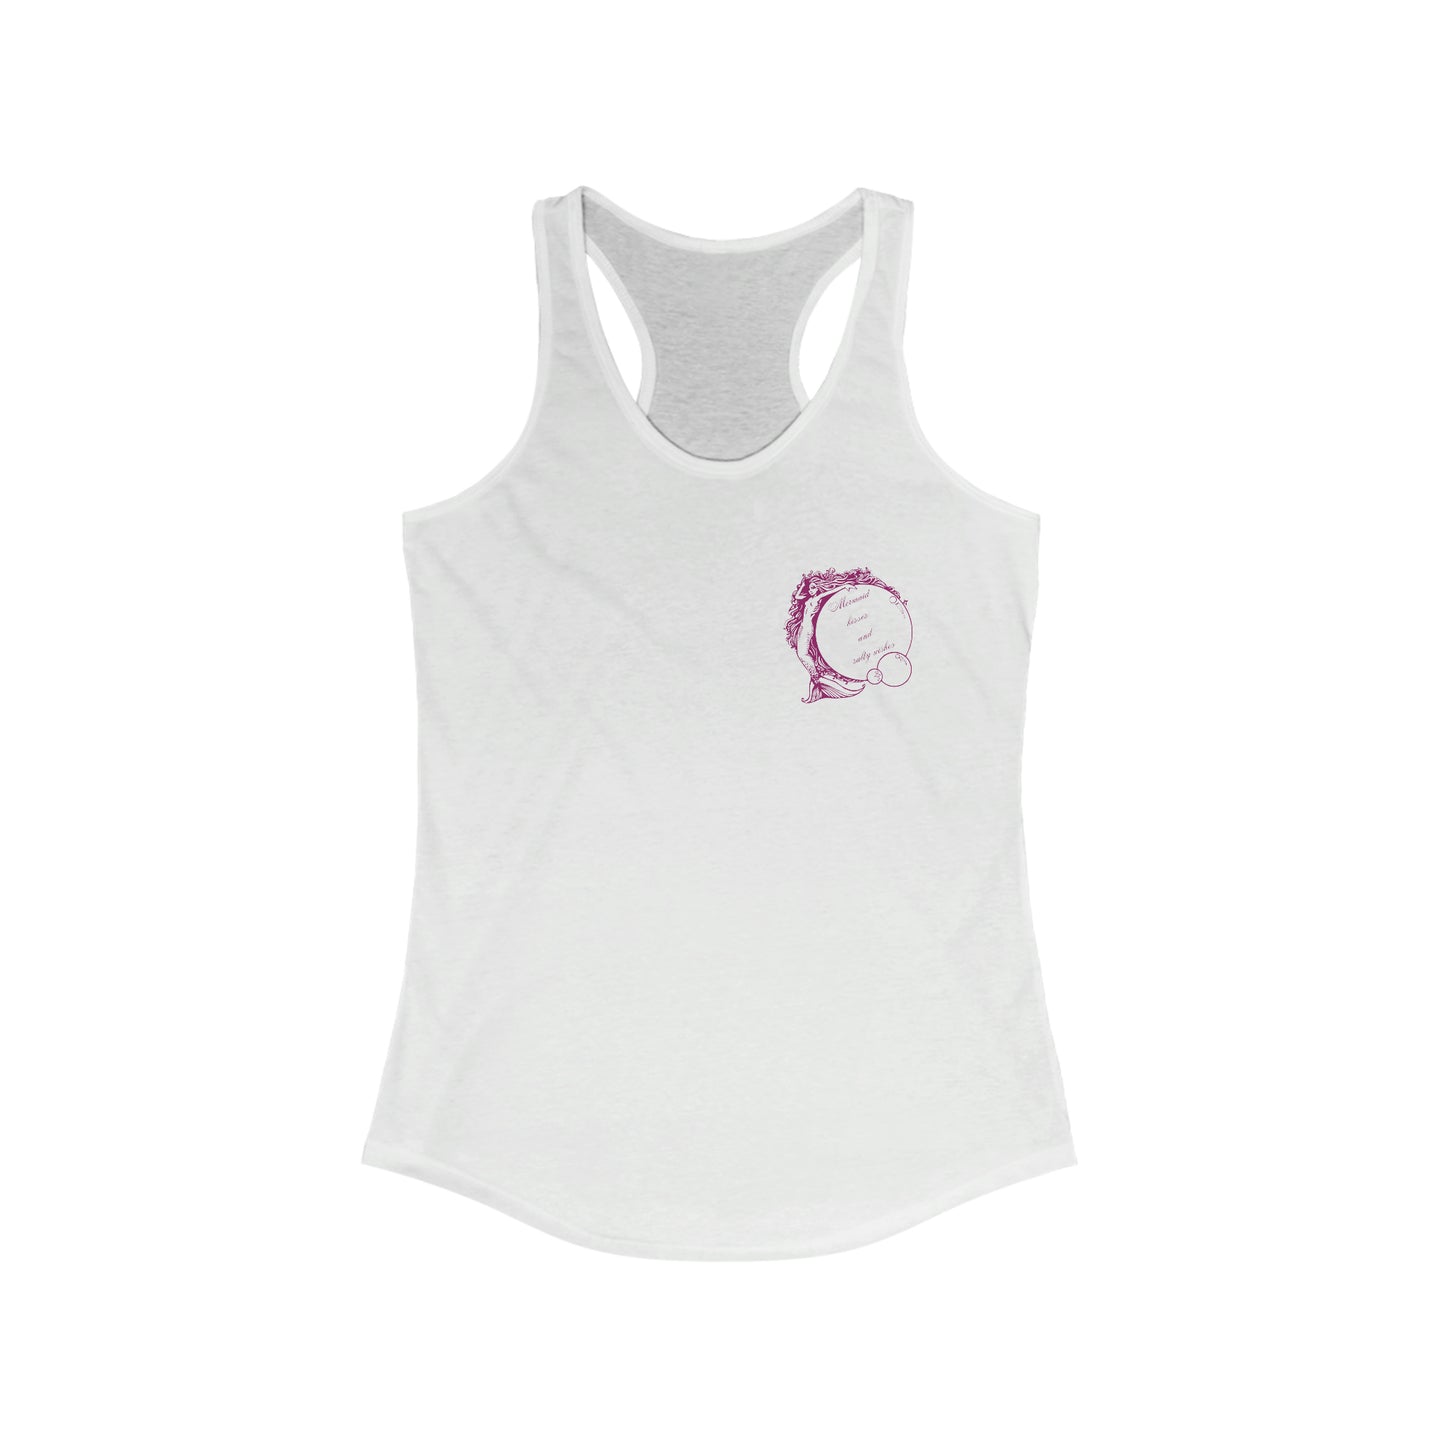 ‘Mermaid kisses and Salty Wishes’ Printed Front & Back. Women's Ideal Racerback Tank